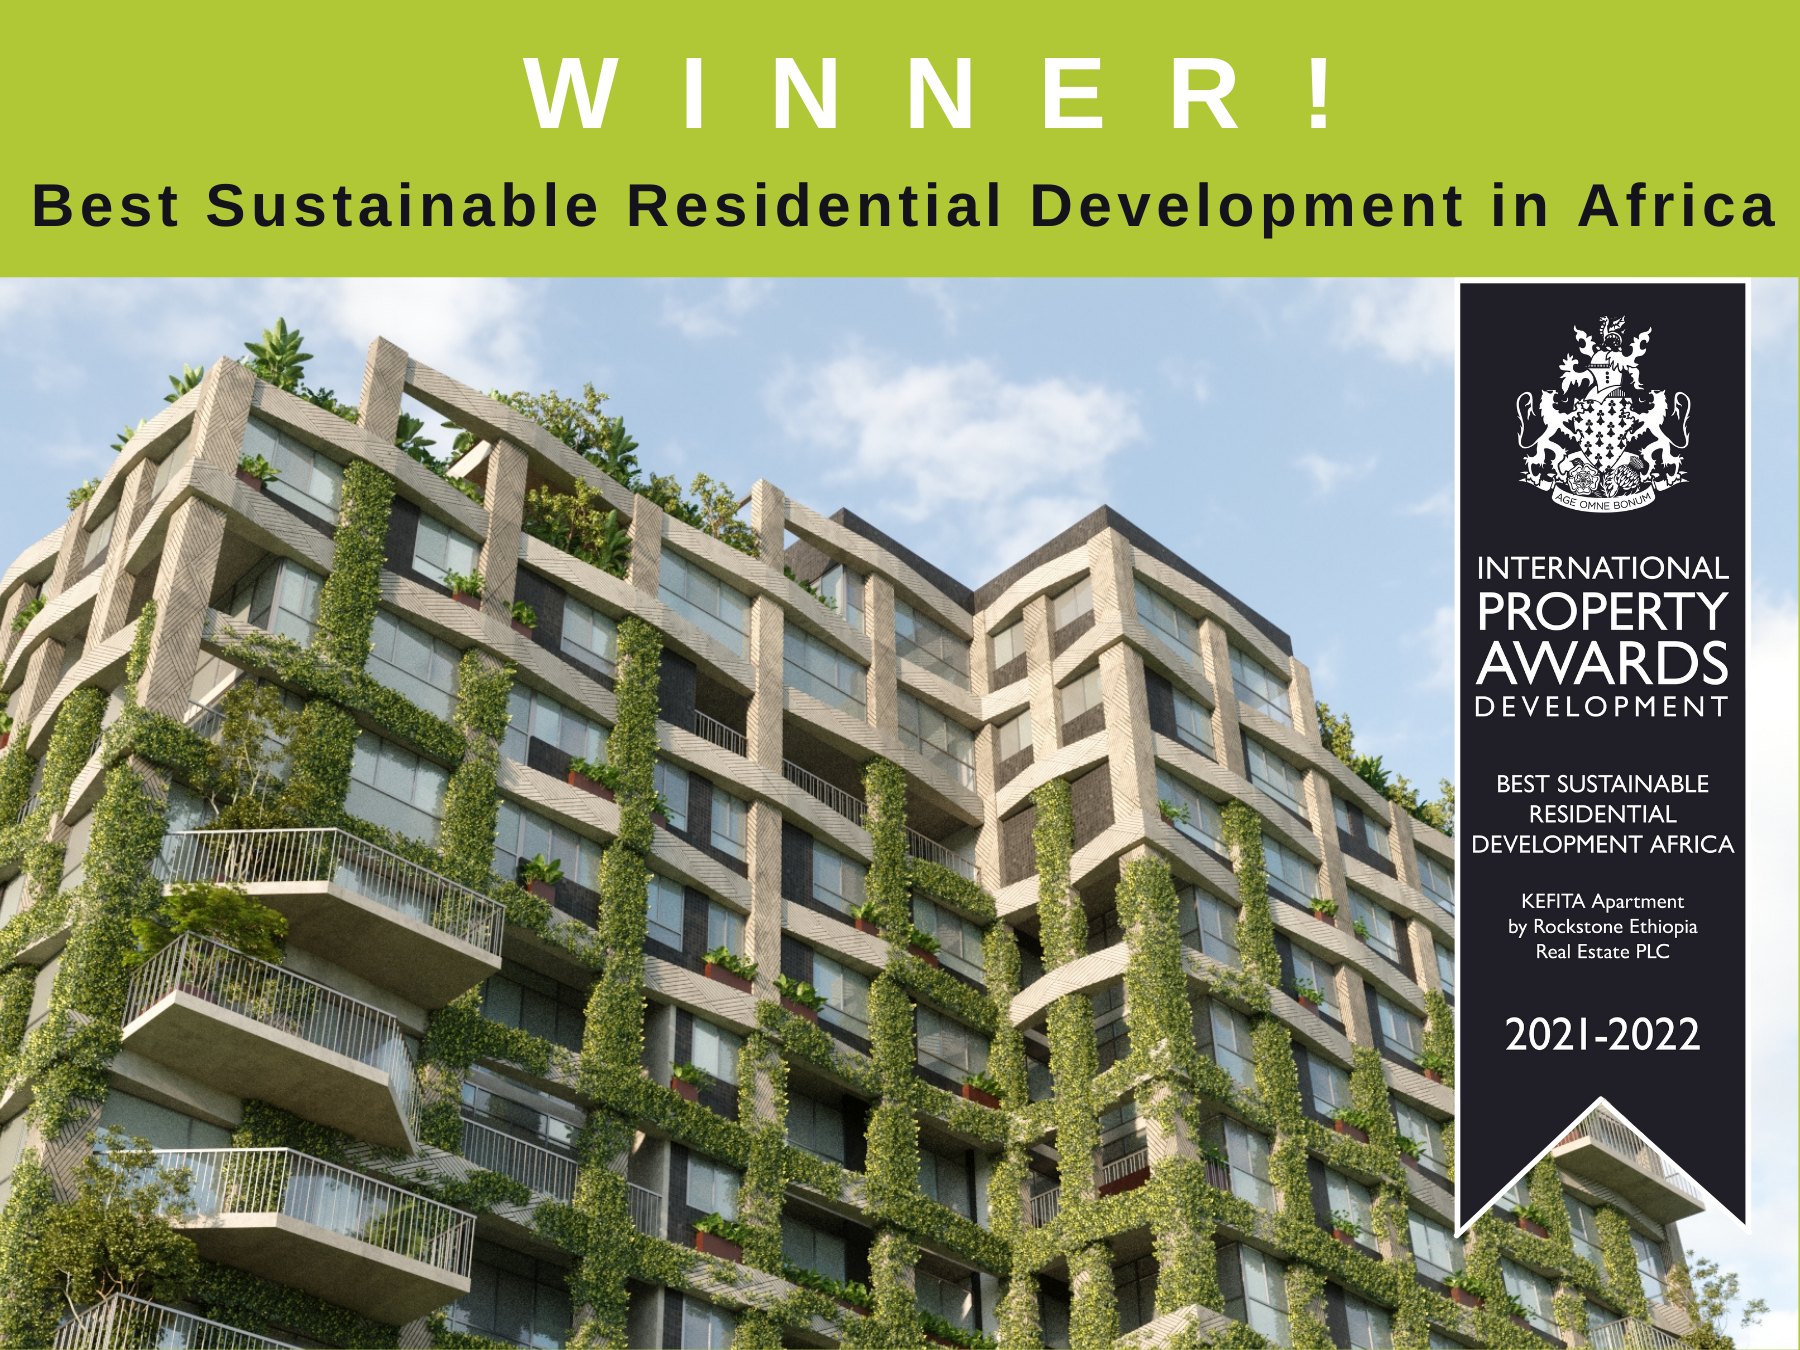 Kefita is the winner of the best sustainable residential development in Africa award